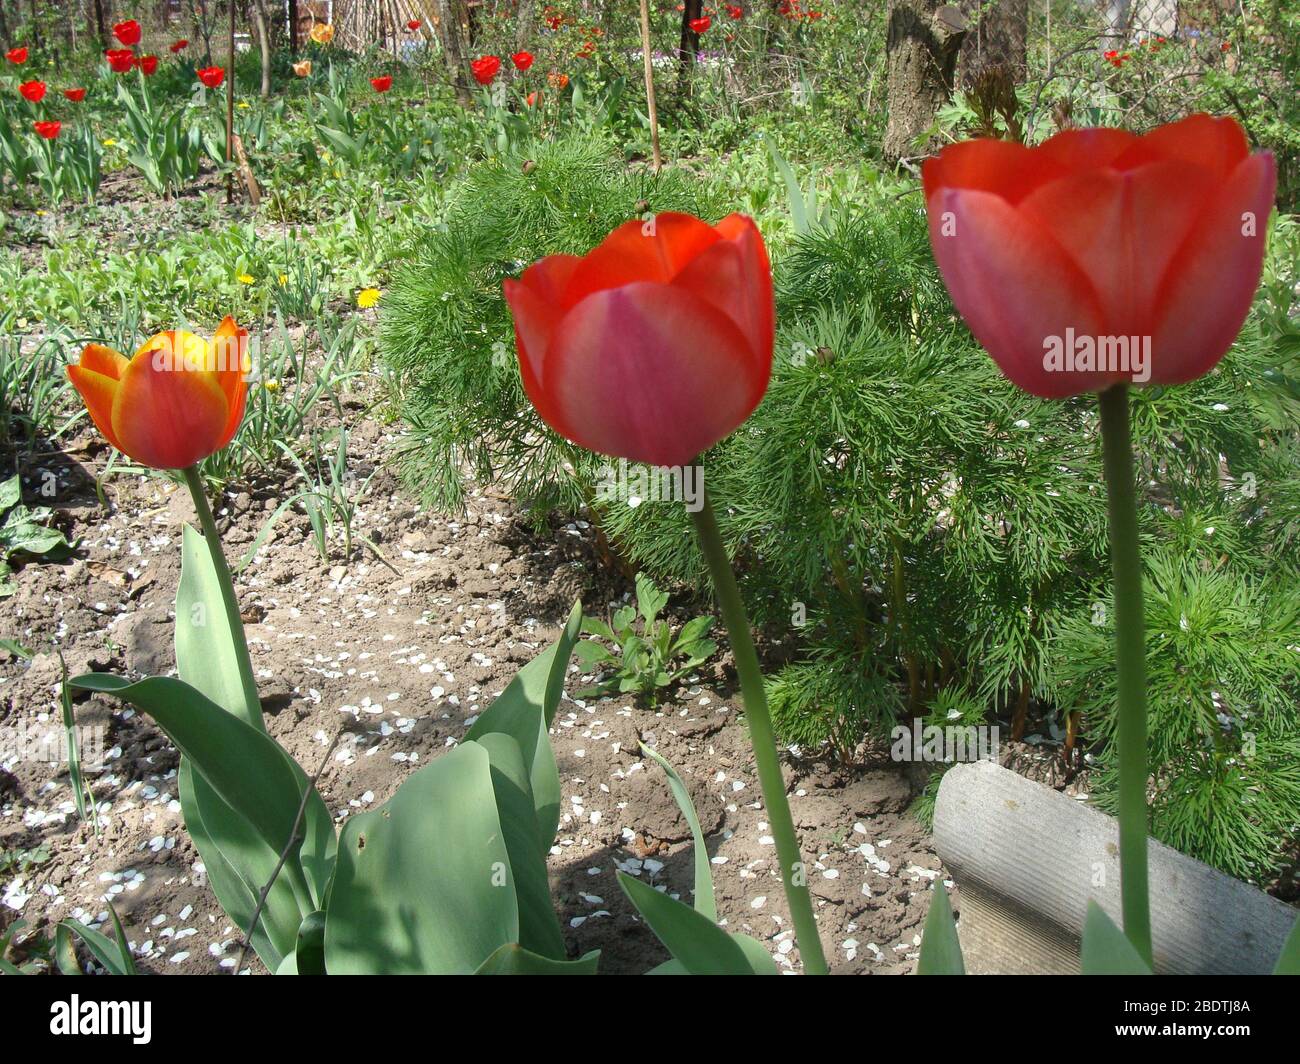 Alley of red tulips during flowering in a garden among flowers Stock Photo